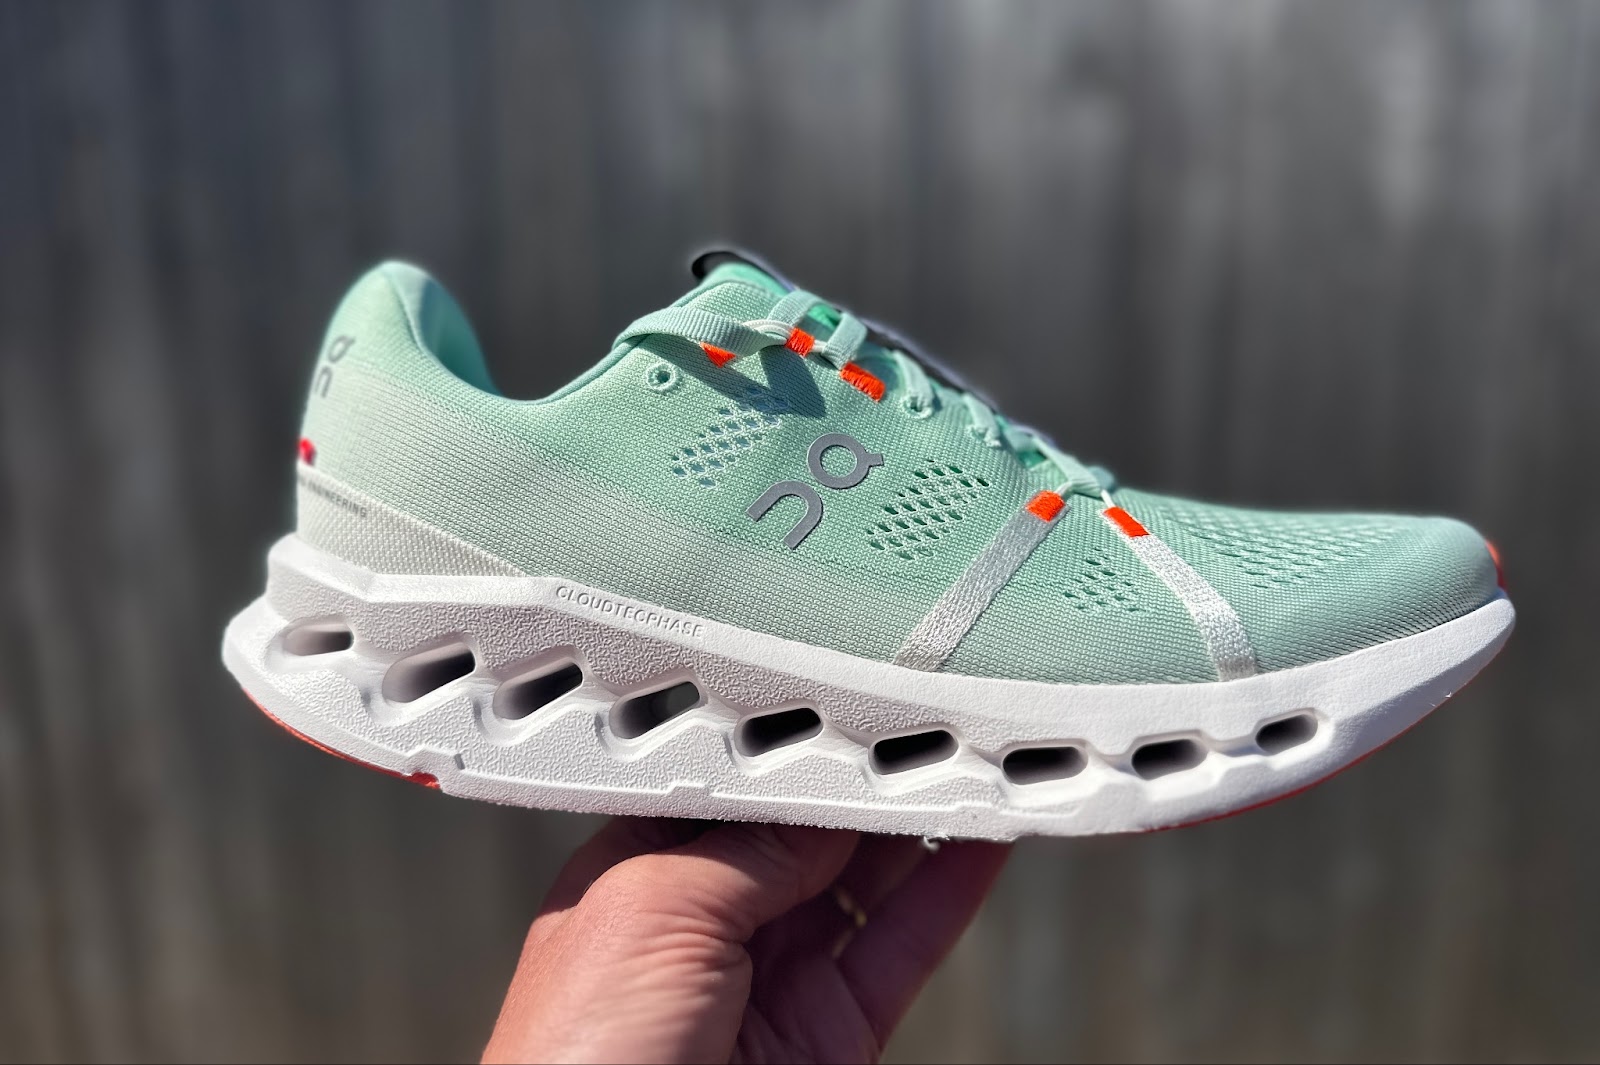 On Cloud 5 Ready Review: The Most Durable Cloud Shoes Yet